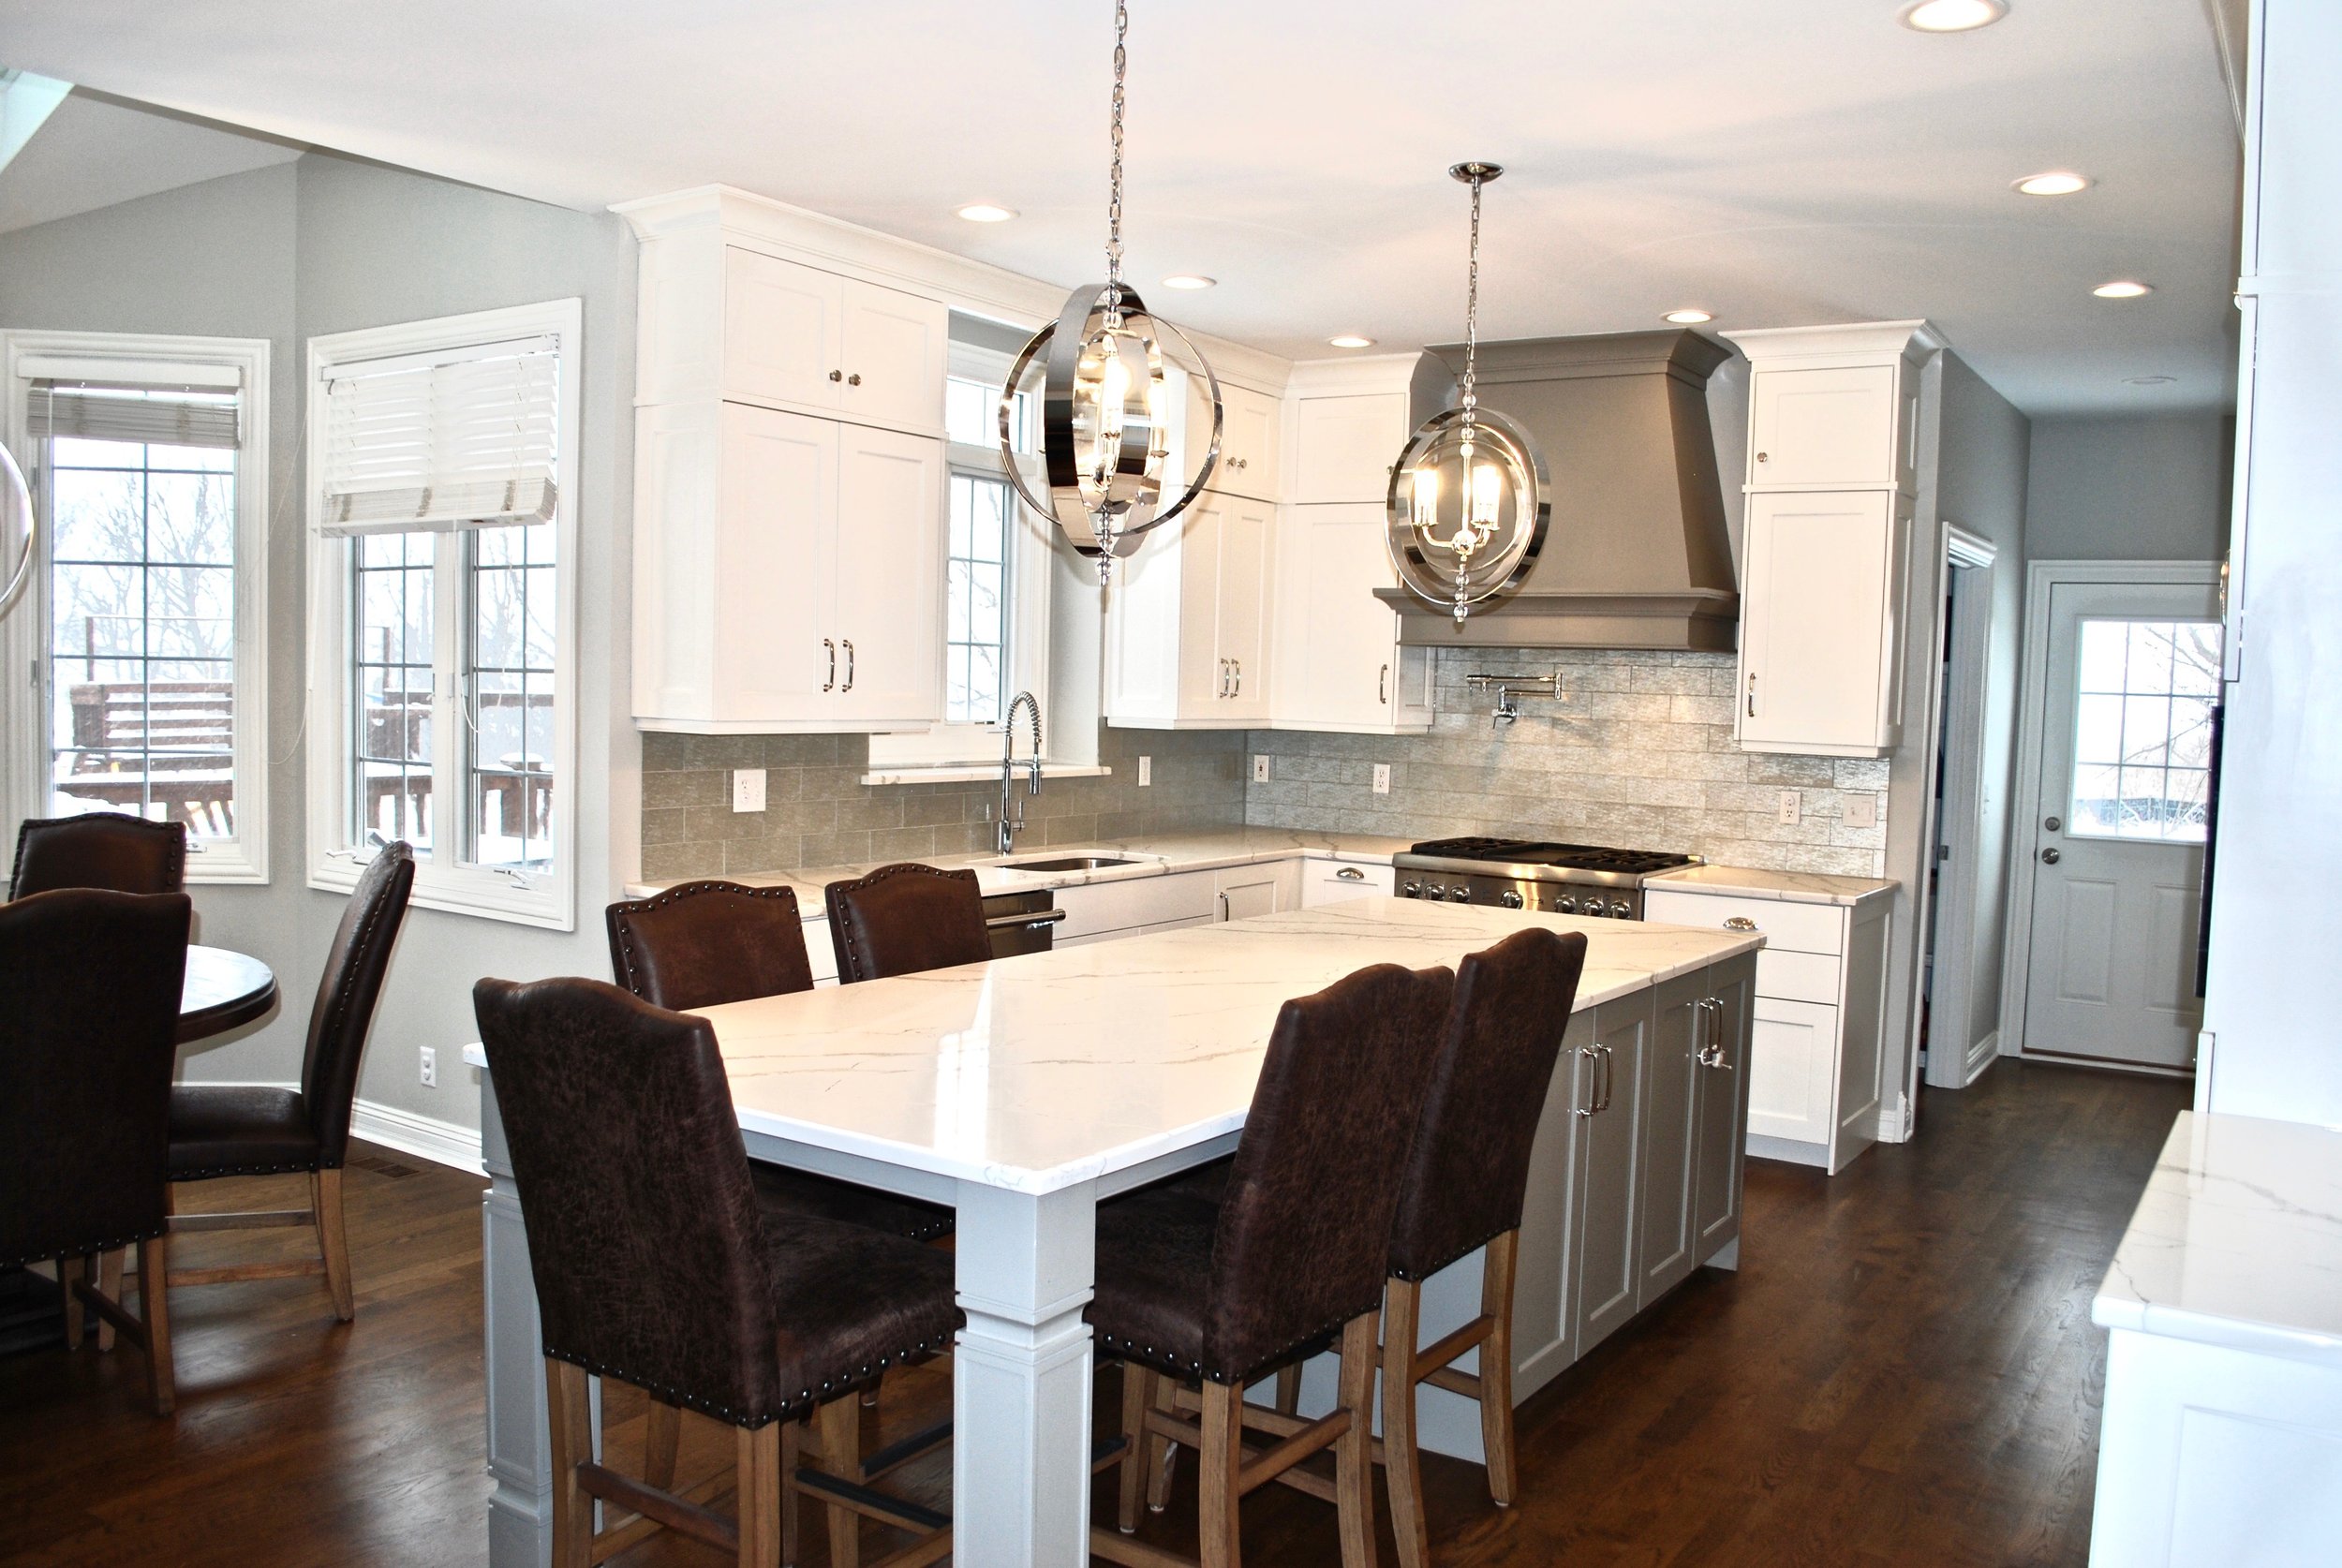 CUSTOM KITCHEN CABINETRY IN SAINT CHARLES IL